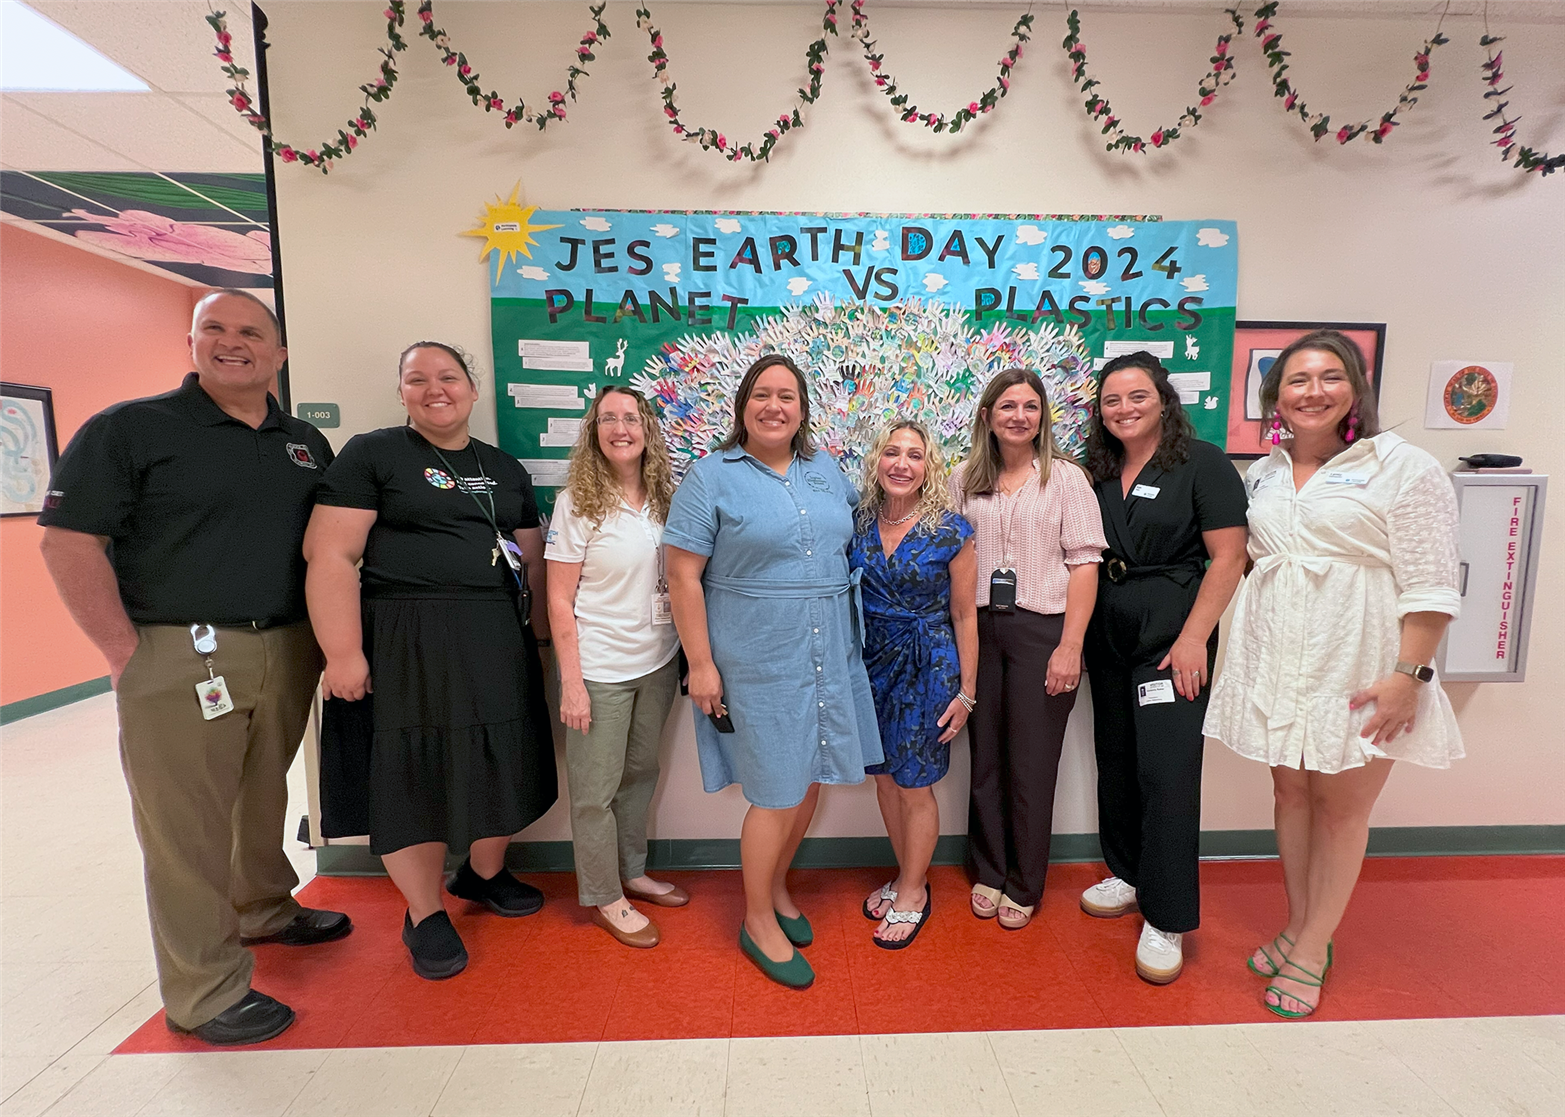  Jupiter Elementary Global Education day event activities